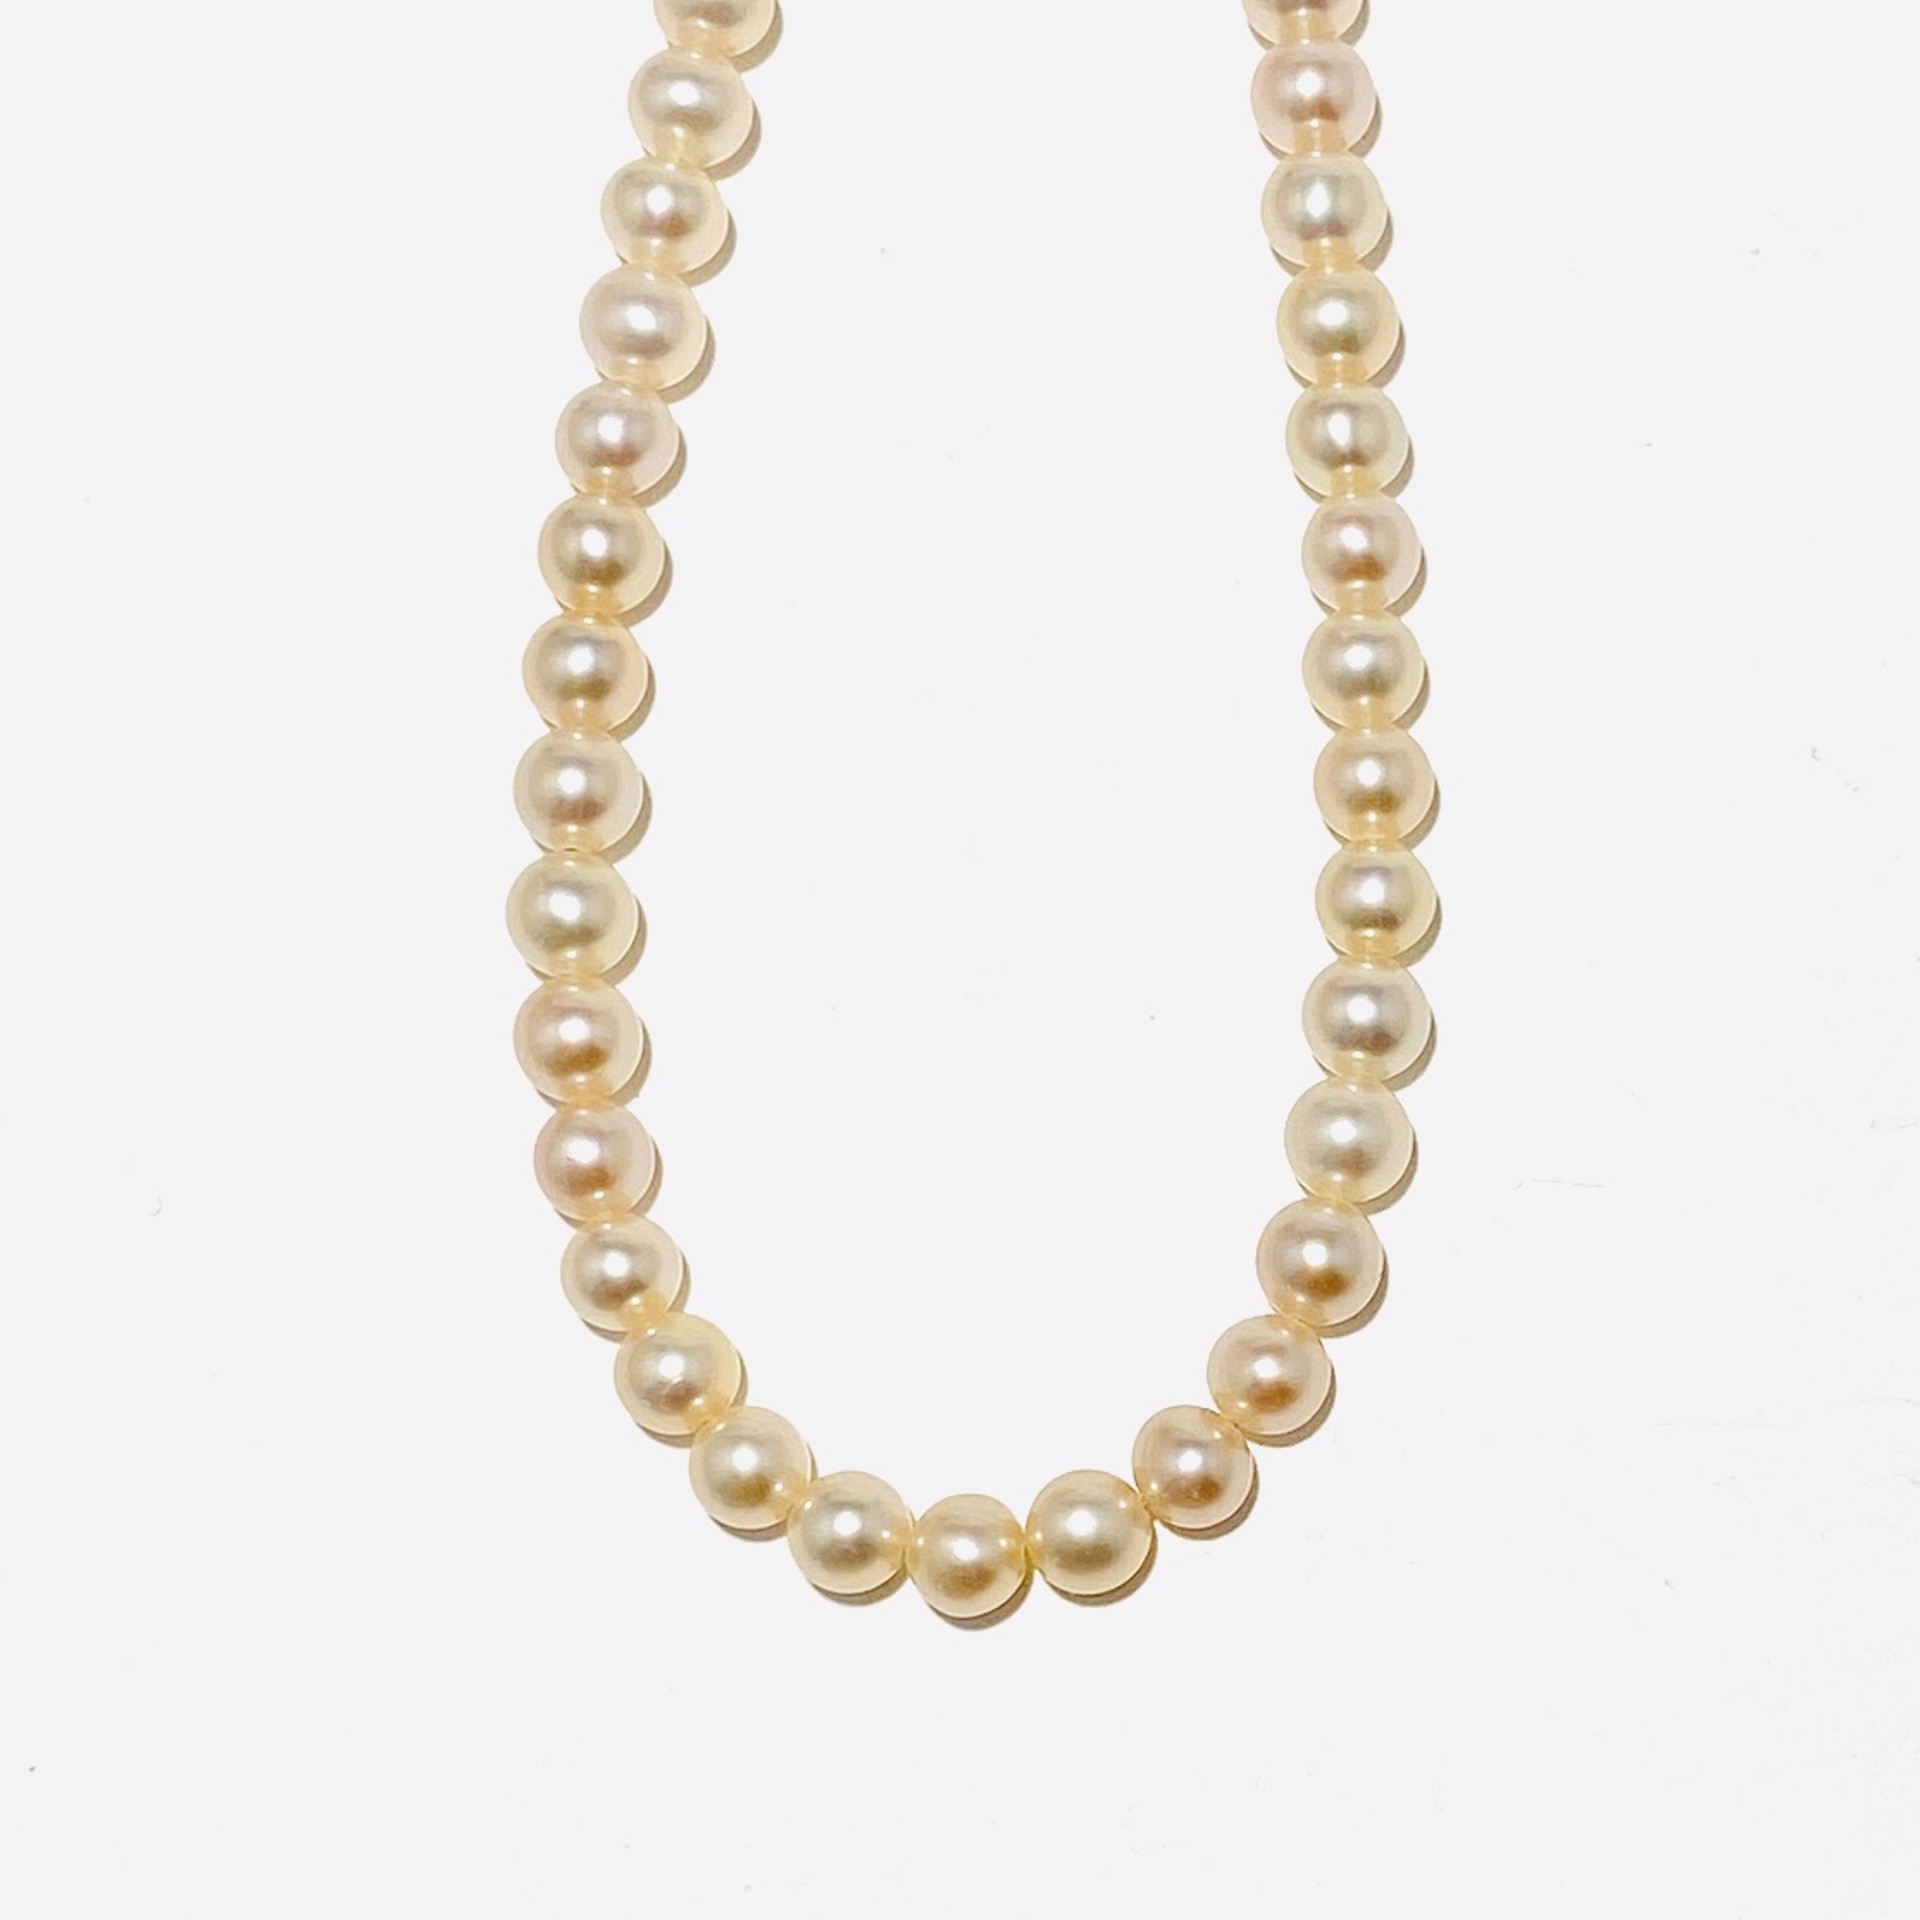 Pink Pearl Strand Necklace by Nance Trueworthy